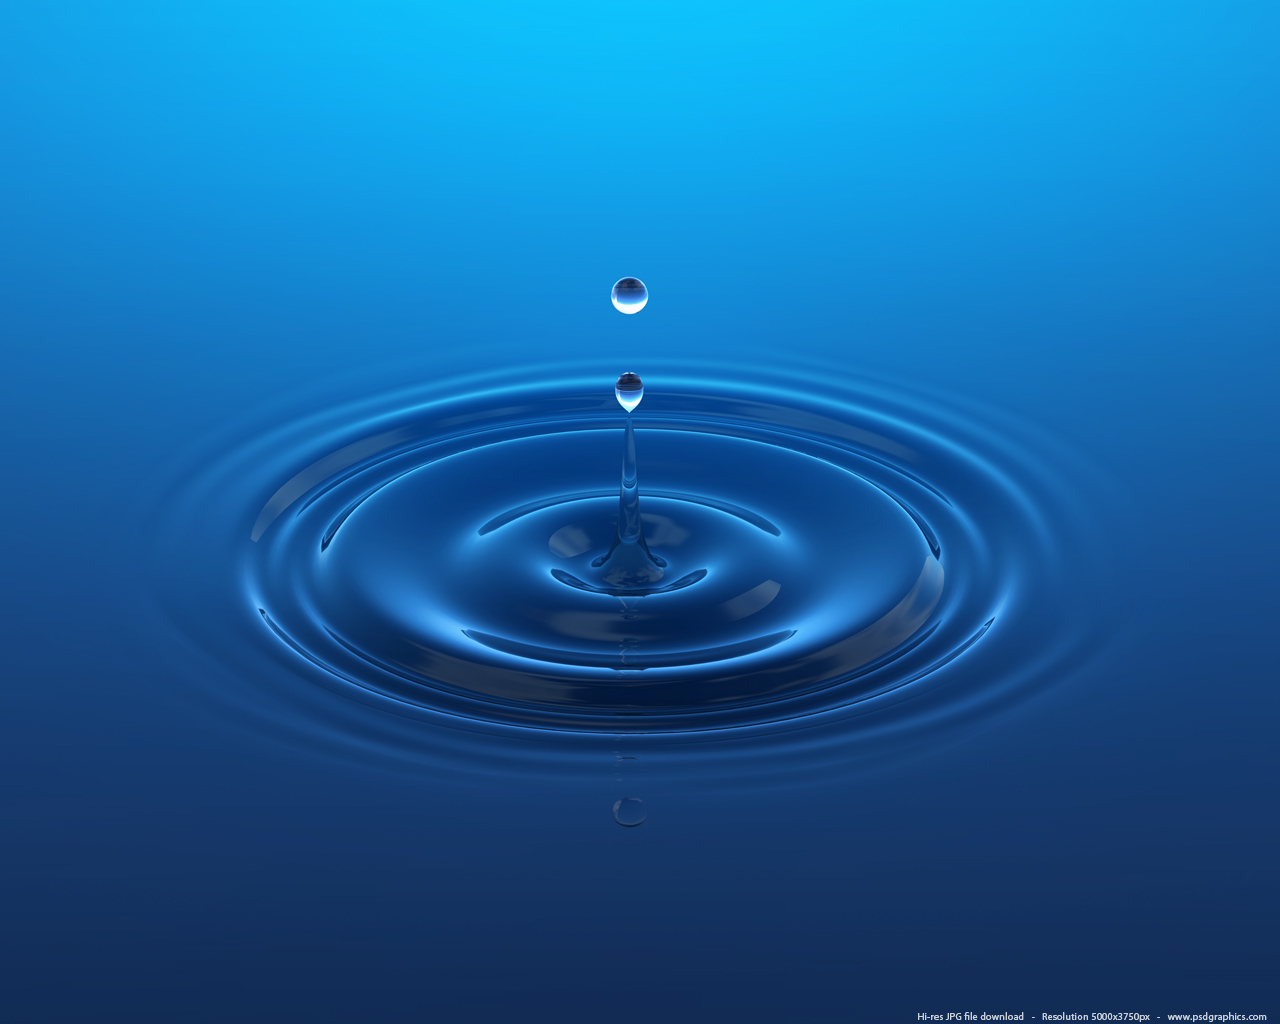 Medium size preview 1280x1024px Water drop background